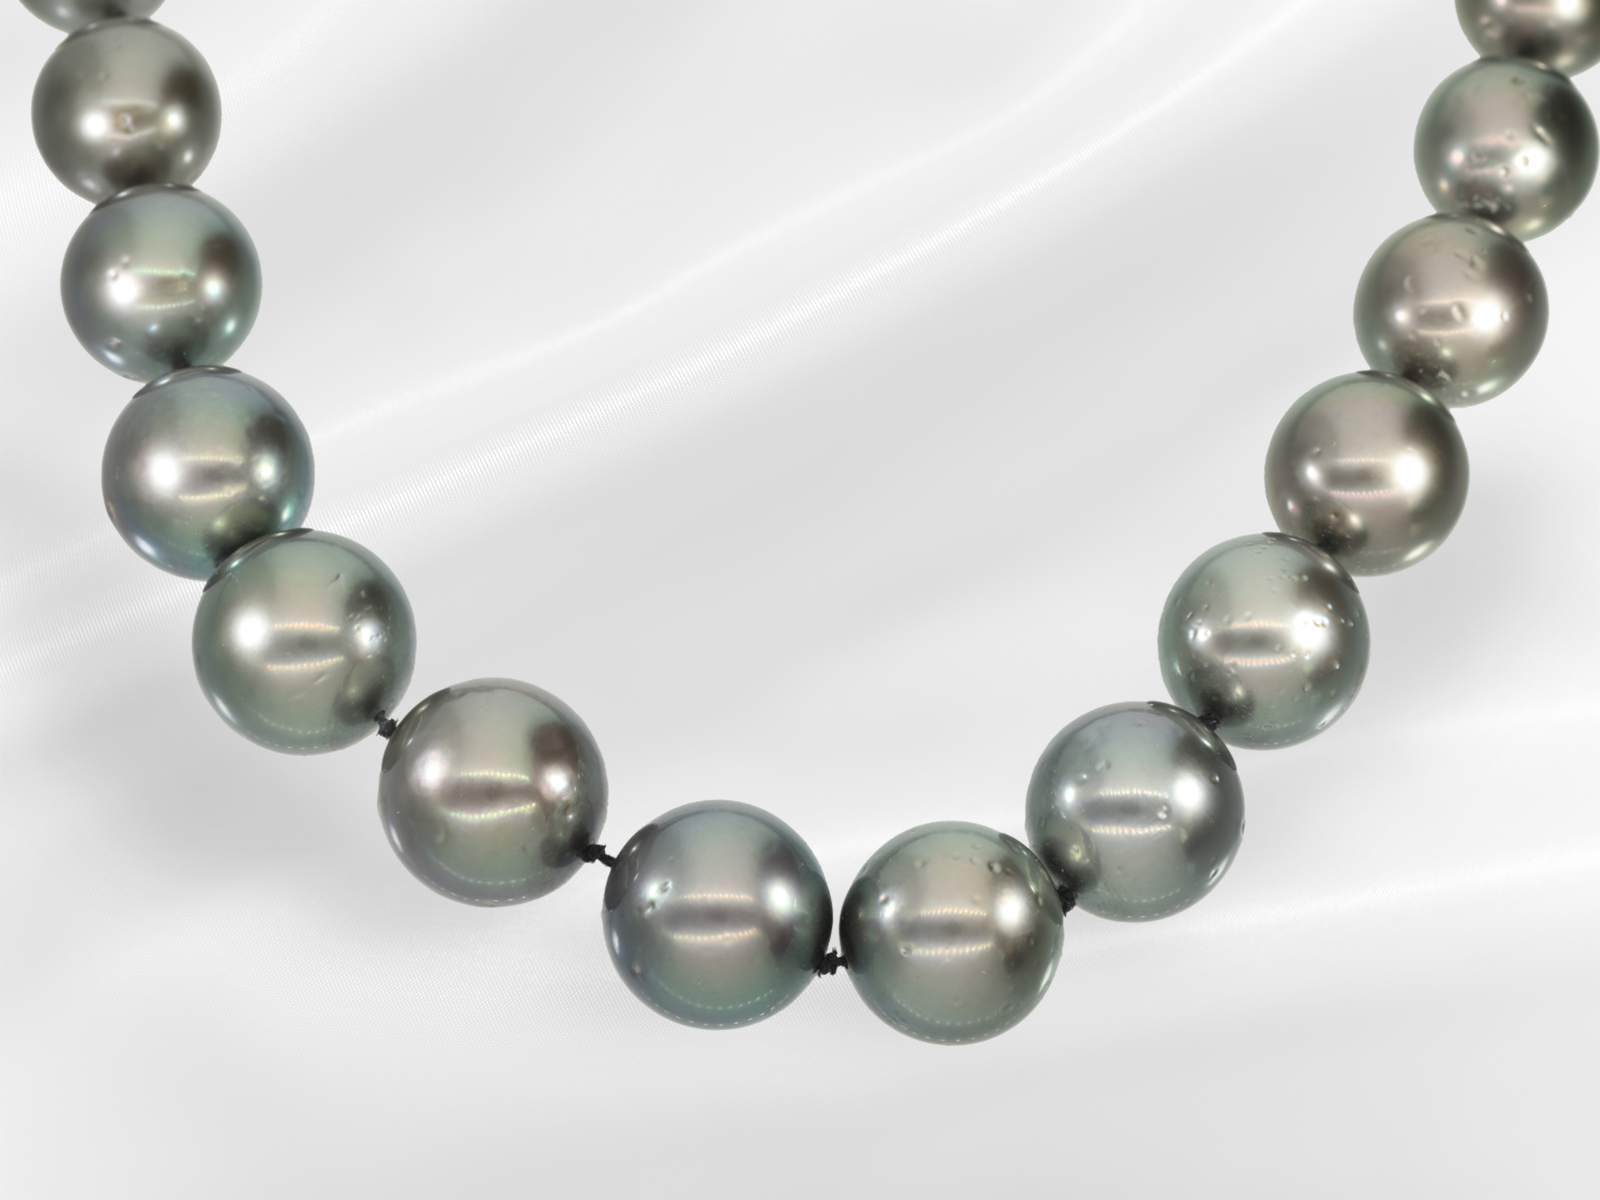 Necklace: formerly very expensive Tahitian pearl necklace 12-15mm!, original price approx. 13,000€,  - Image 4 of 6